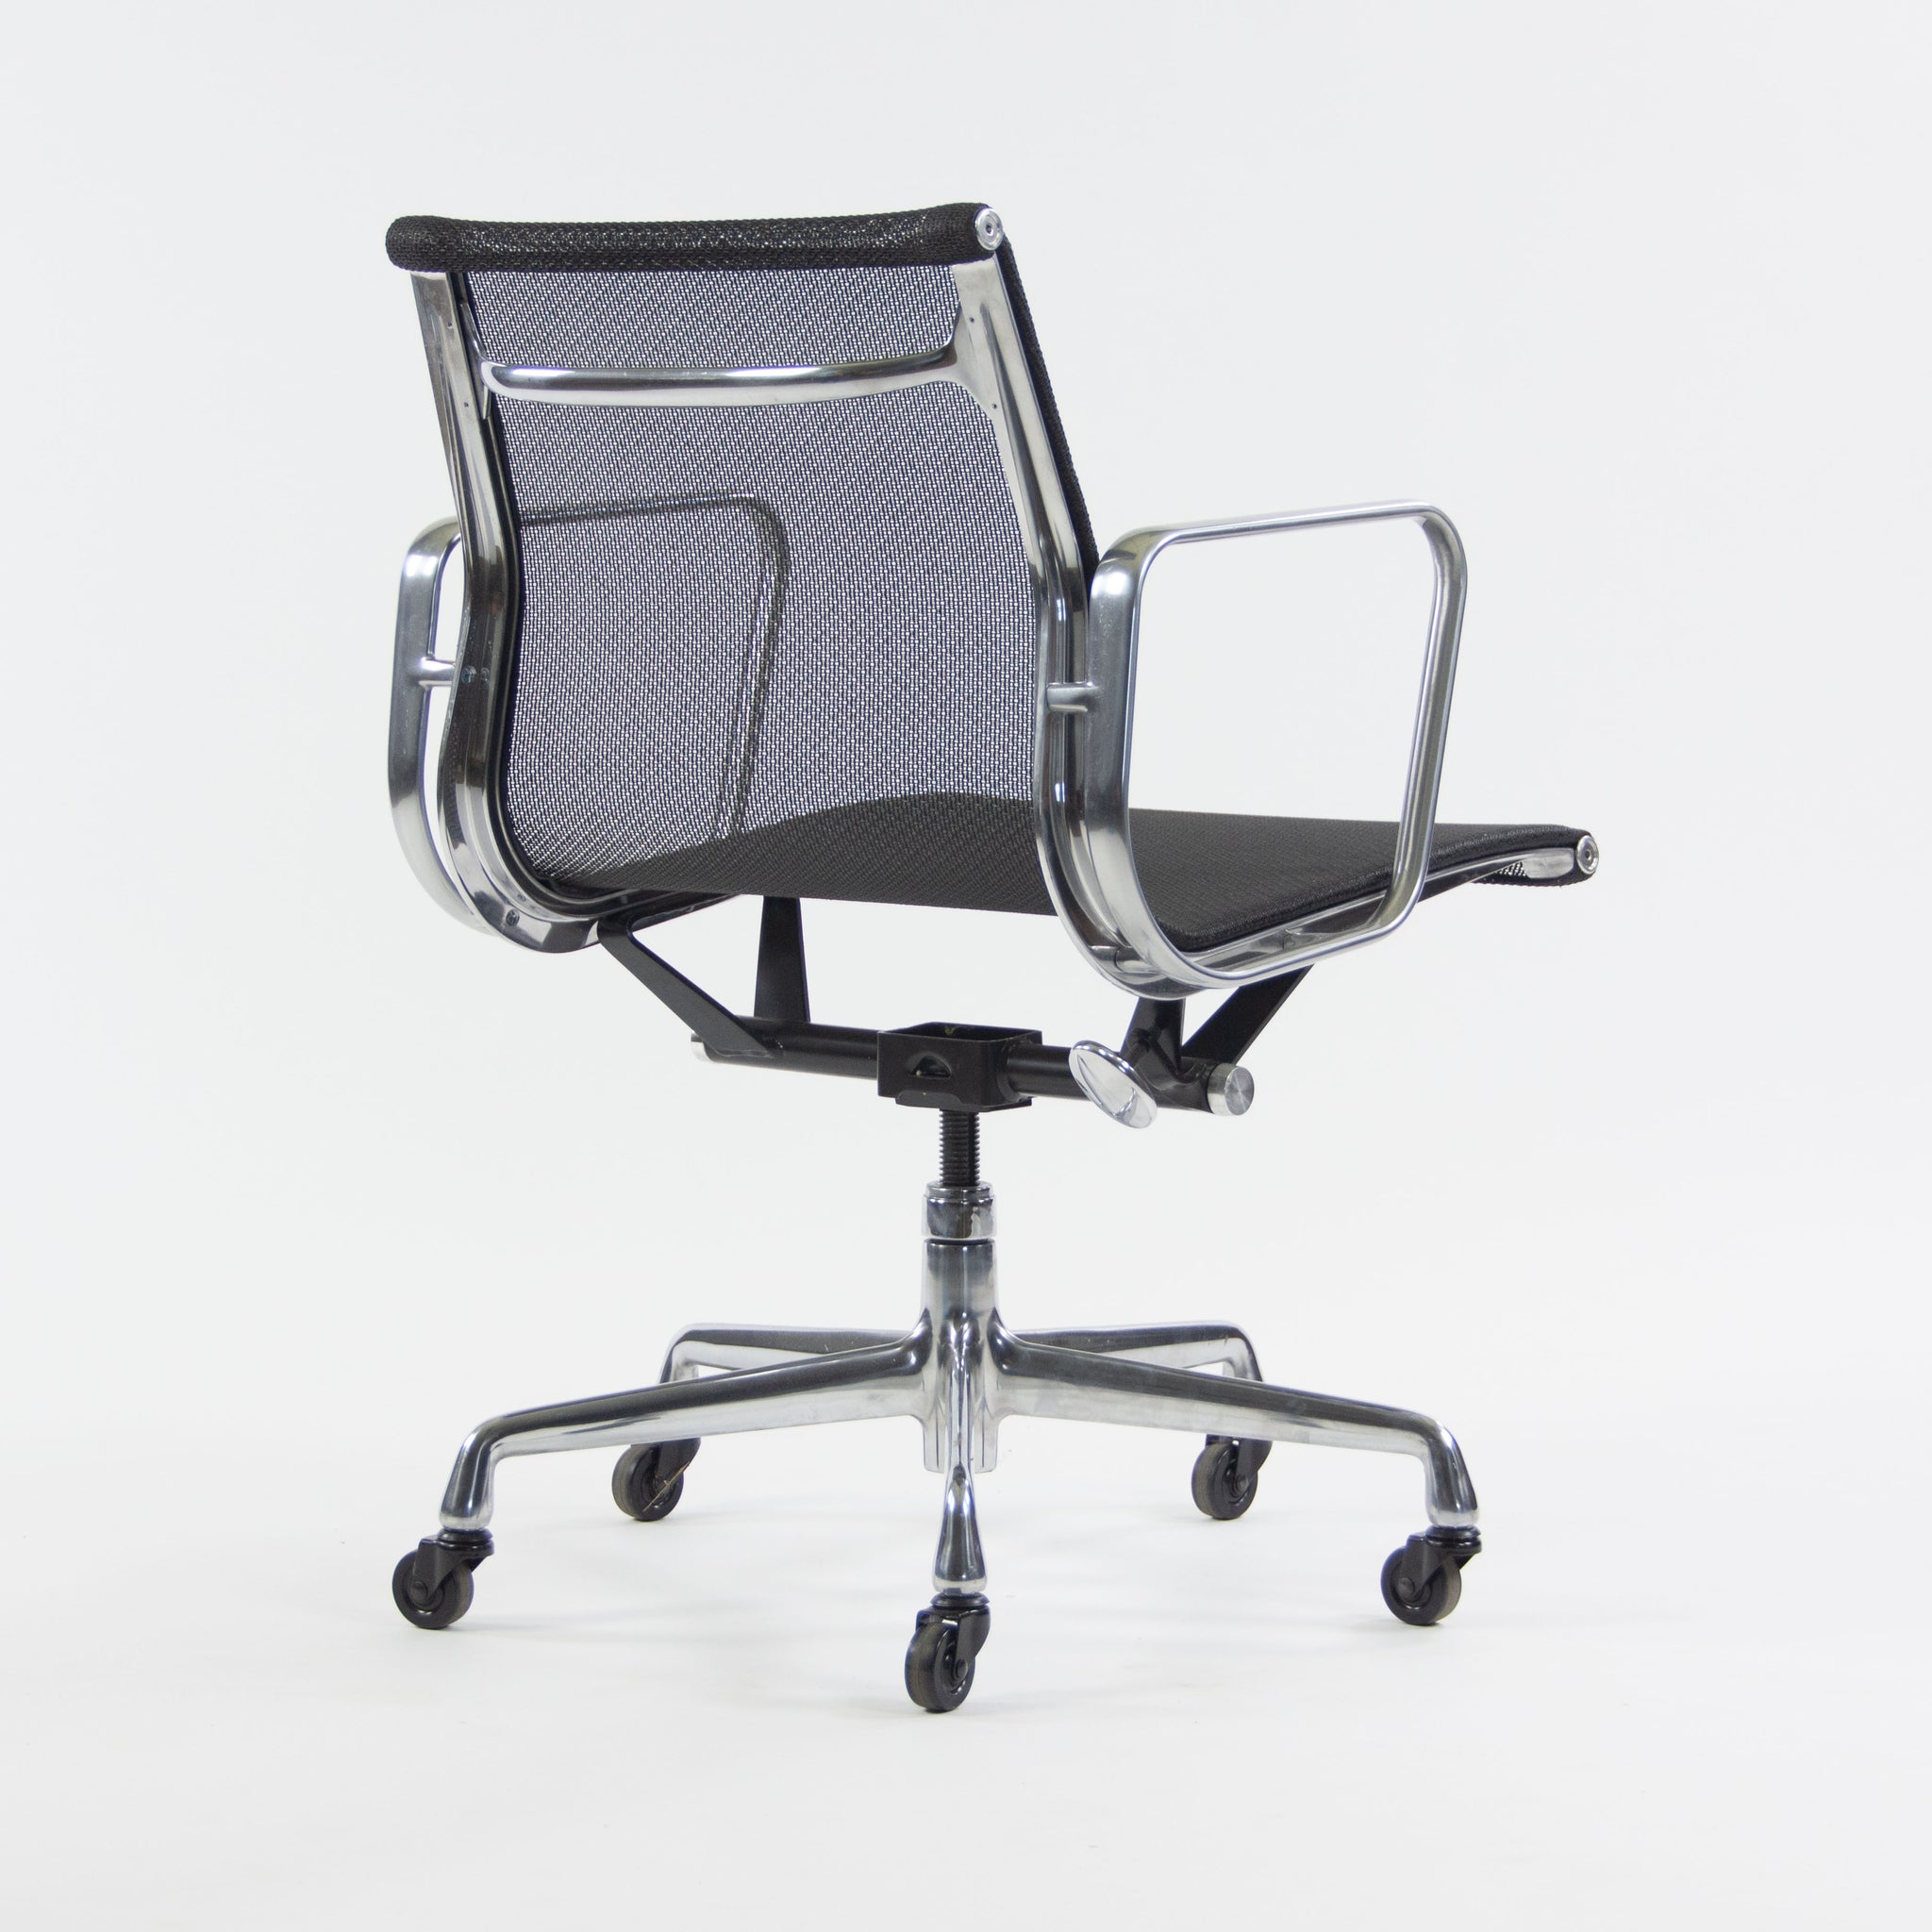 SOLD Herman Miller Eames New Old Stock Low Aluminum Group Management Desk Chair Mesh